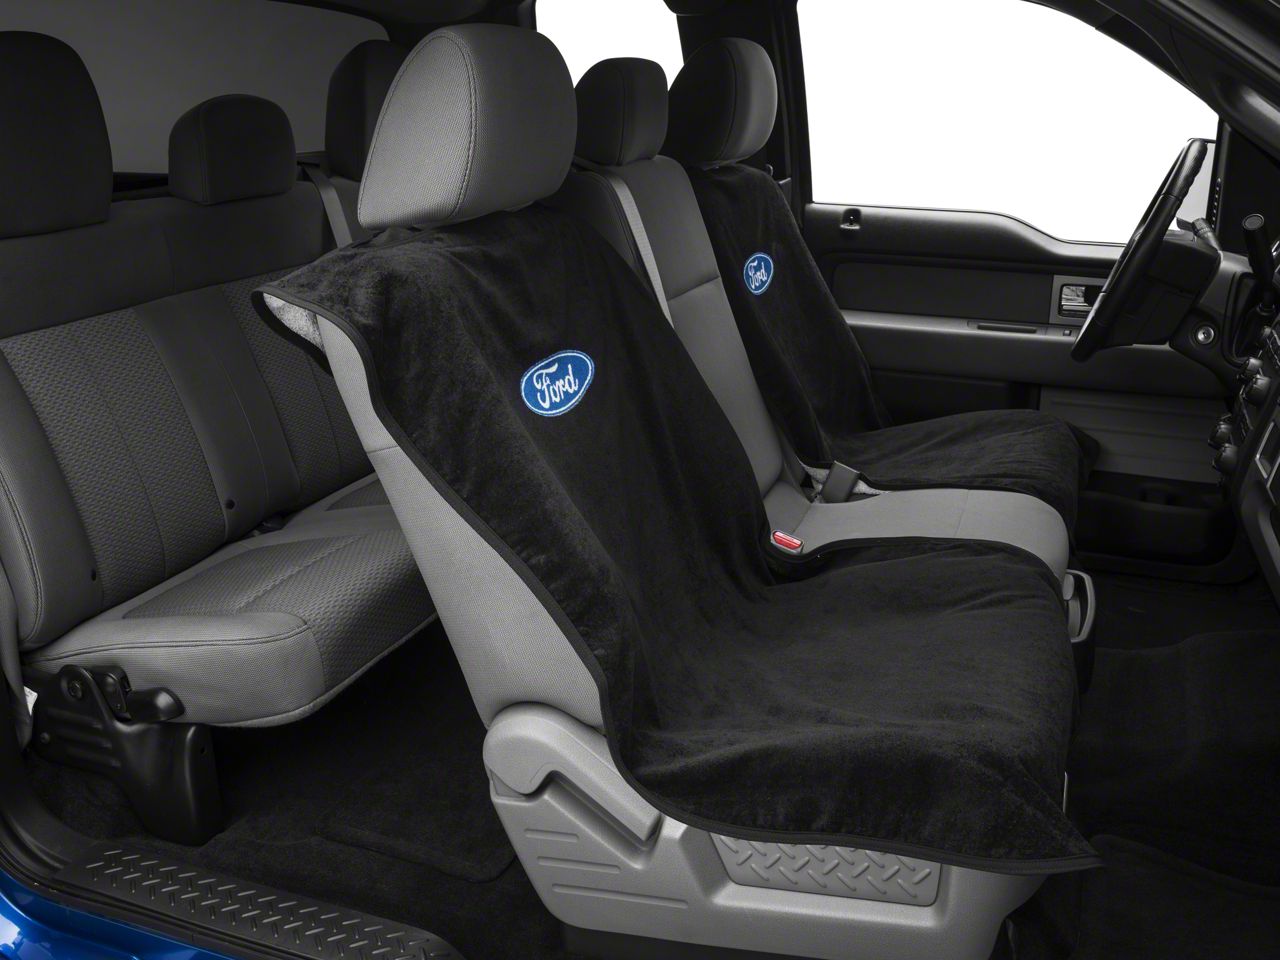 Alterum F 150 Seat Armour Protective Cover With Ford Oval Logo Black T102790 97 21 - Seat Covers For 2019 Ford F 150 Supercrew